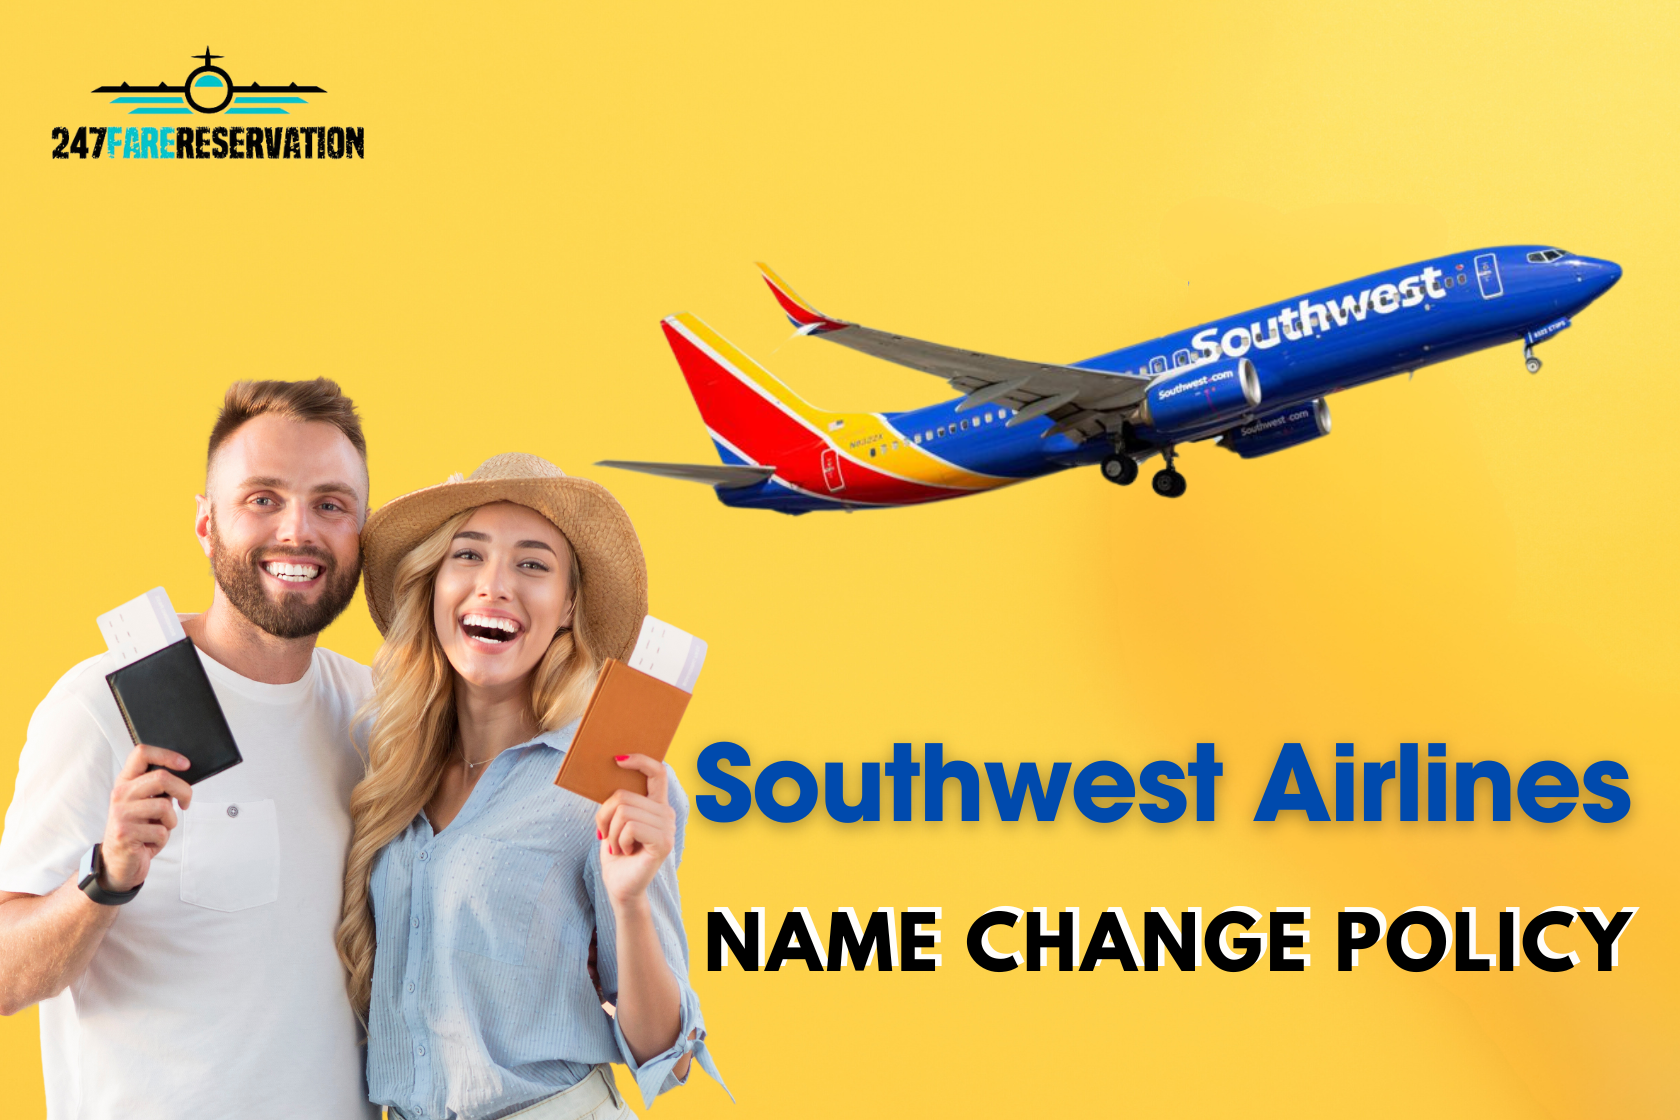 Southwest Airlines Name Change Policy » 247farereservation - Latest News & Blogs